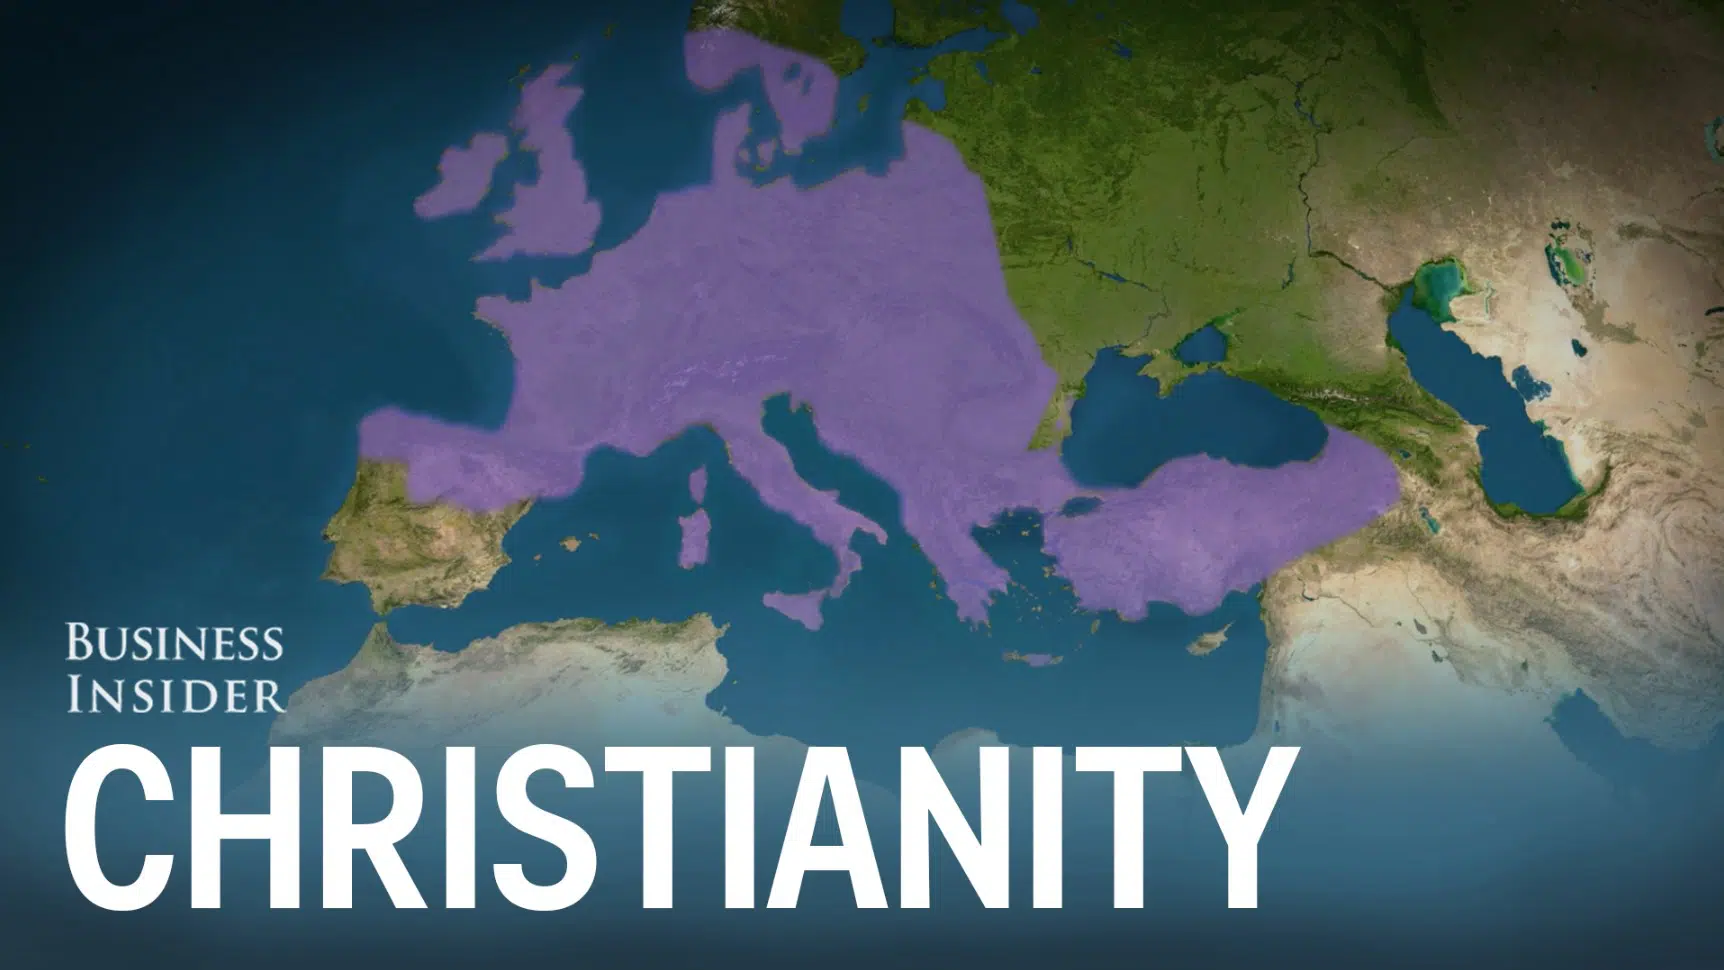 How did Christianity